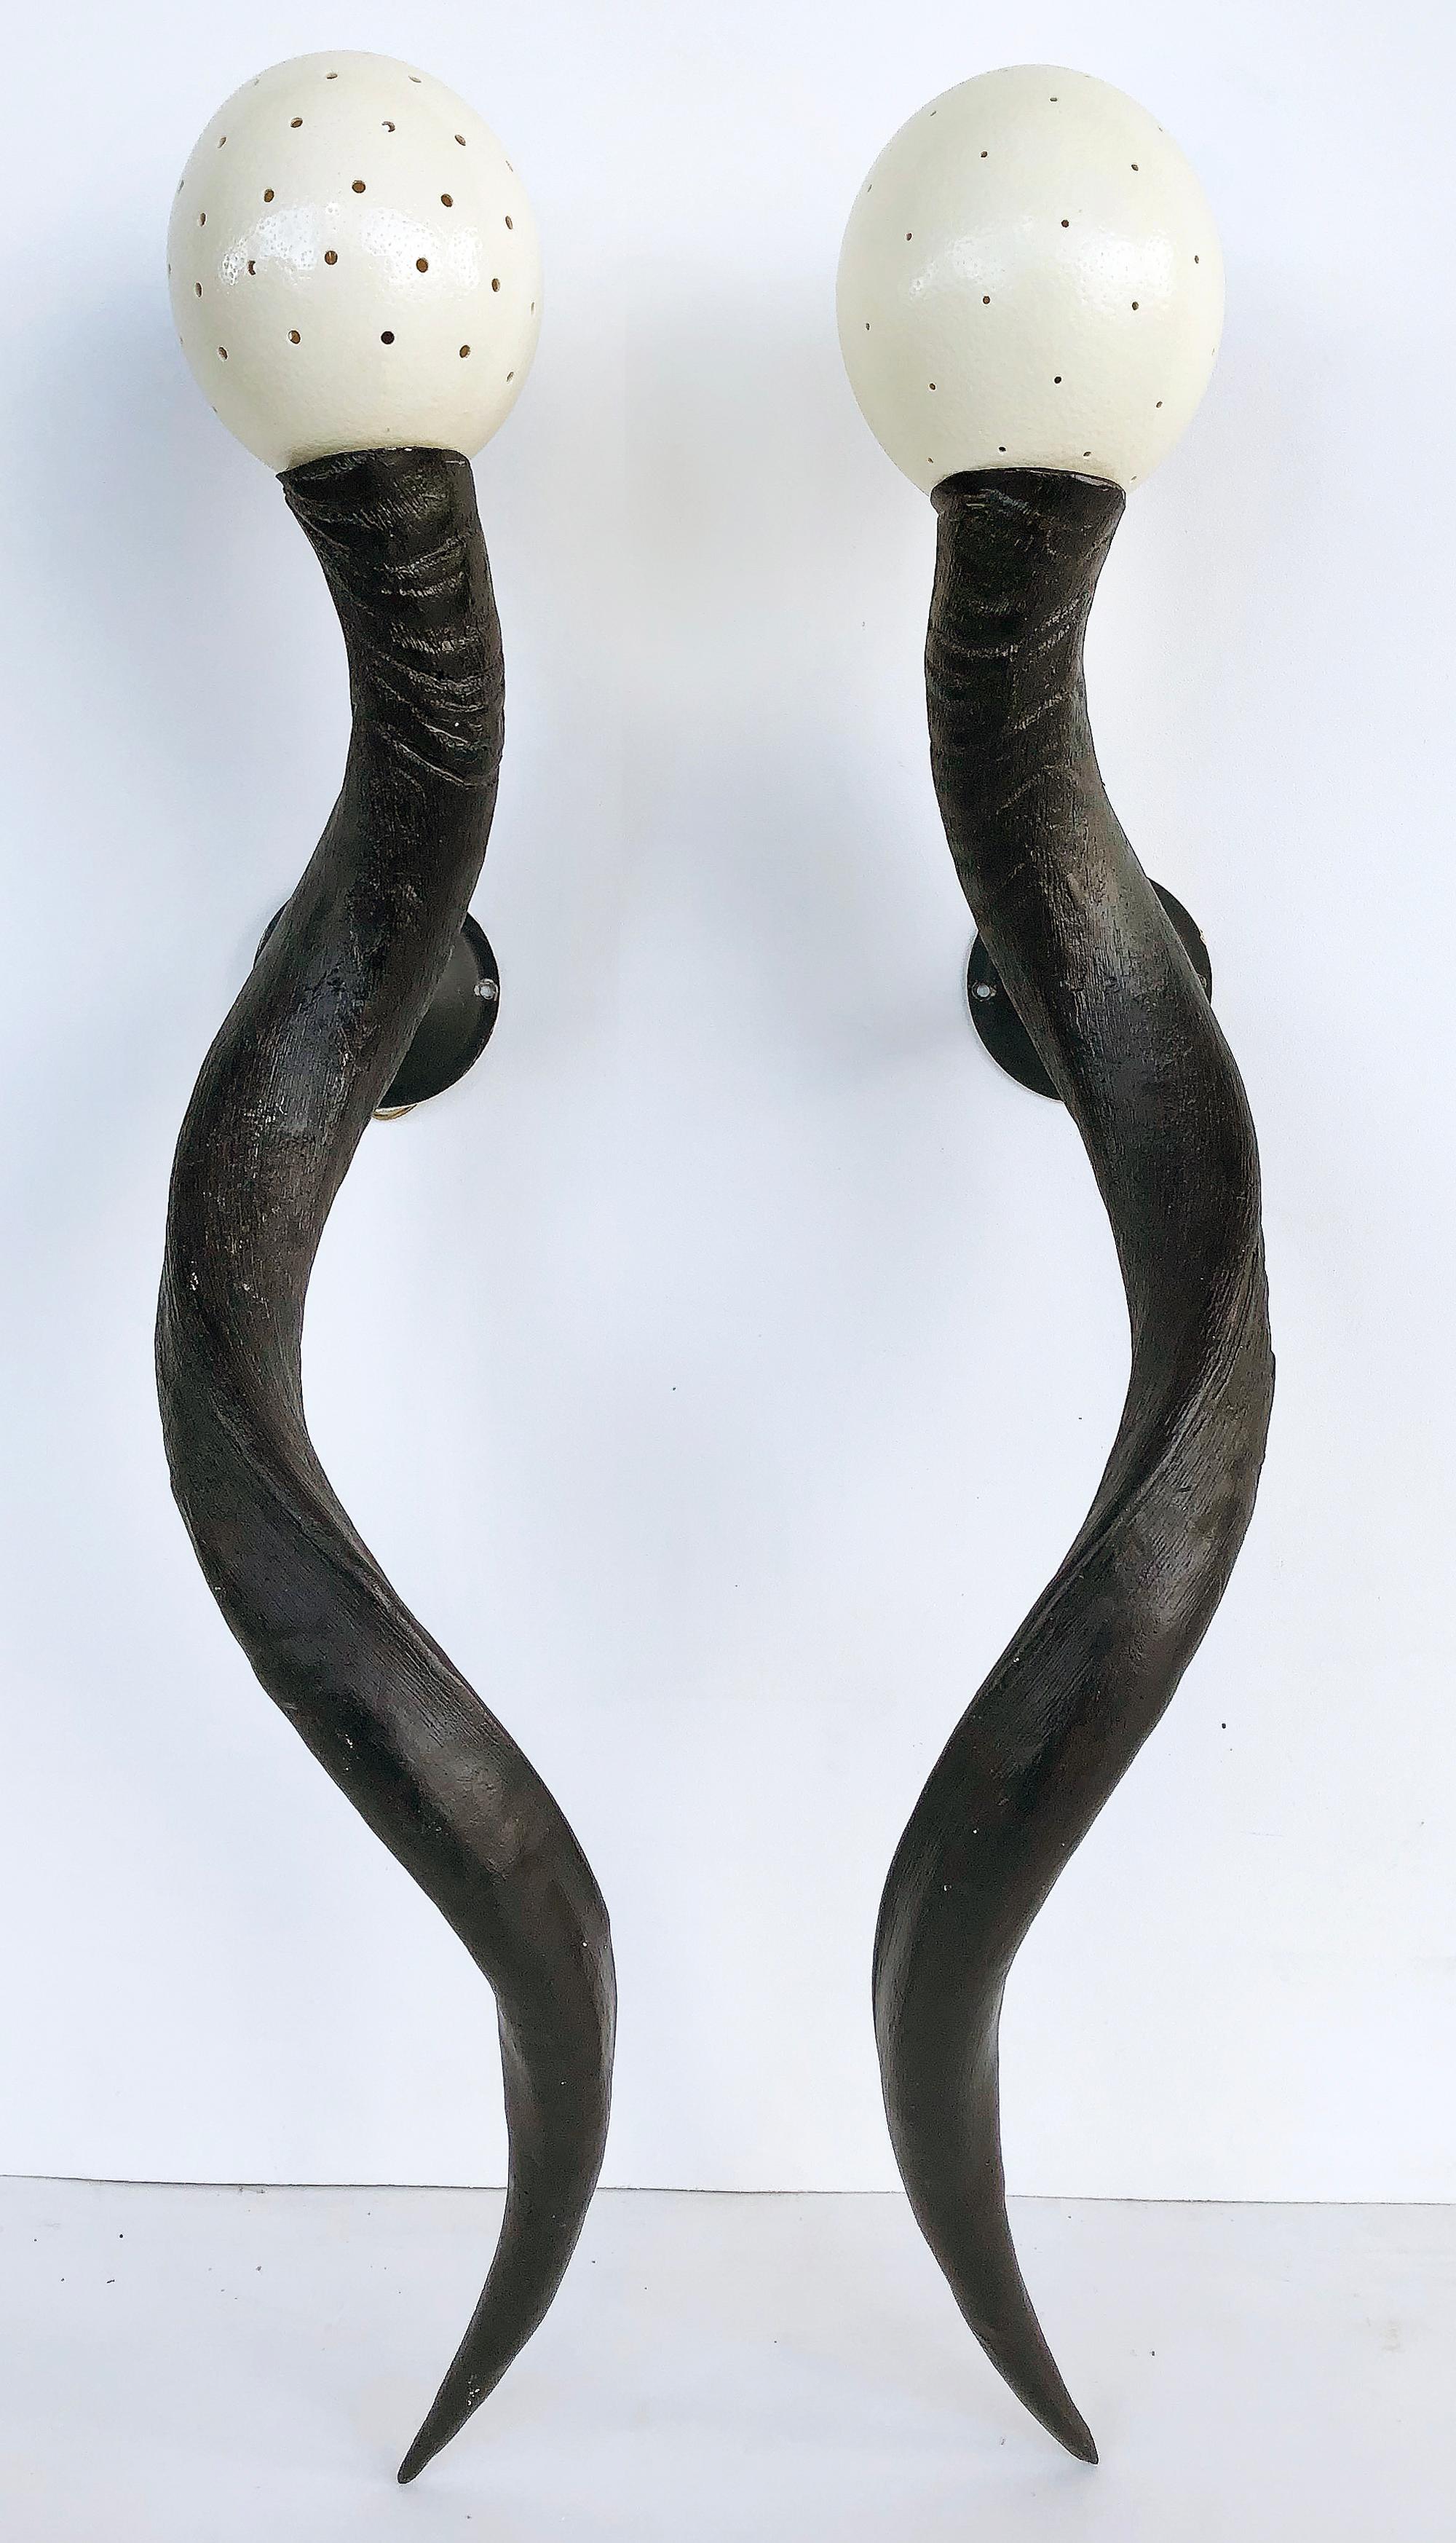 Greater Kudu horn and ostrich egg shell sconces, a pair

Offered for sale is a pair of Greater Kudu horn and ostrich egg sconces created in the style of Anthony Remile. Each horn supports a pierced ostrich egg shade which emits a soft mood light.